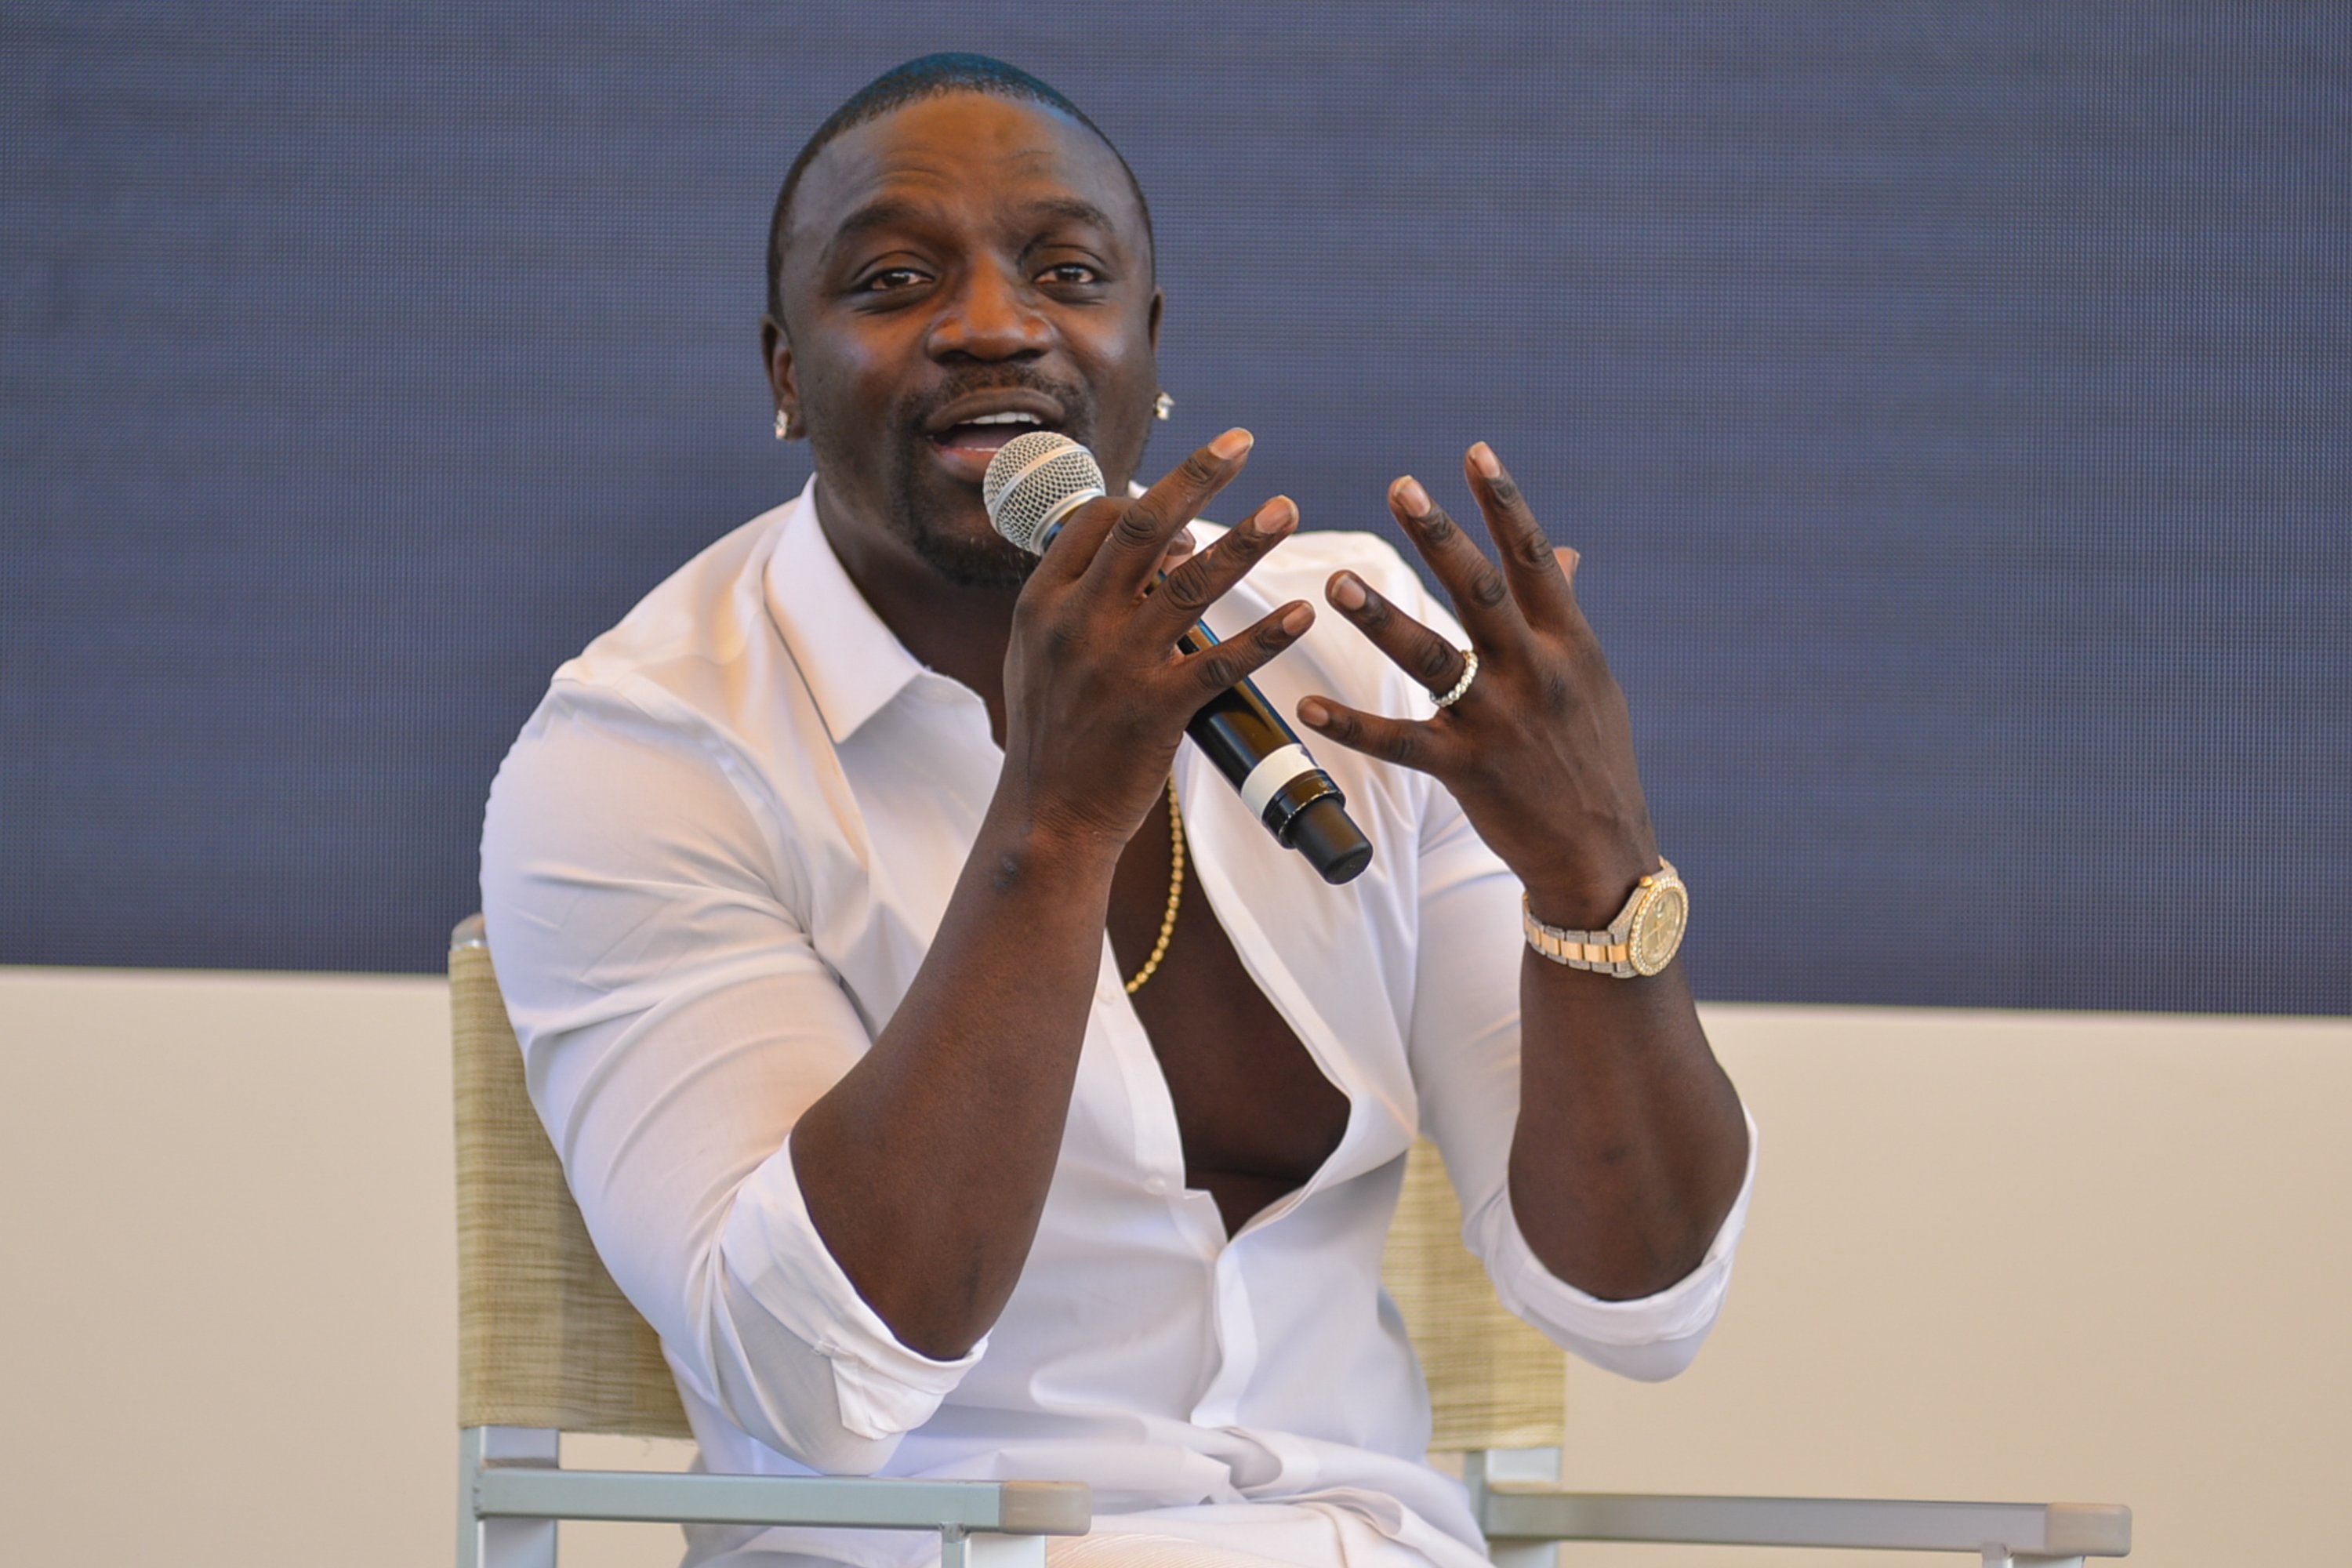 Akon attends the Cannes Lions Festival 2018 on June 19, 2018 in Cannes, France | Photo: Getty Images